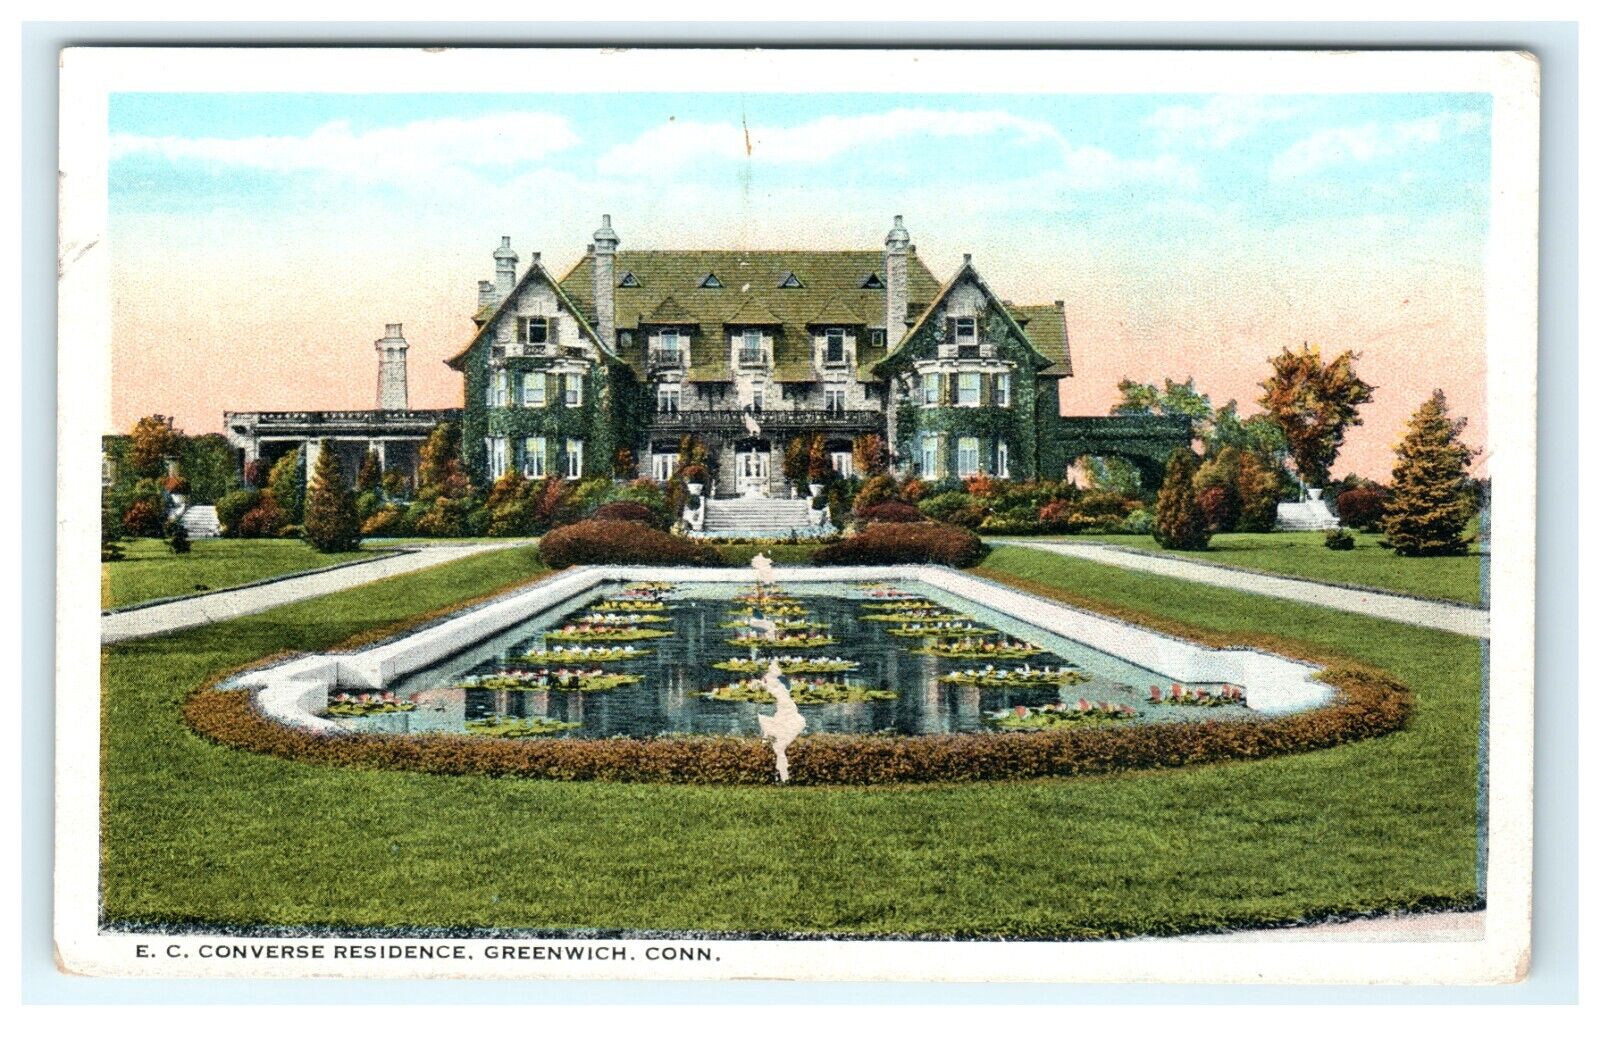 E.C. Converse Residence Greenwich Connecticut Early Postcard - Damaged